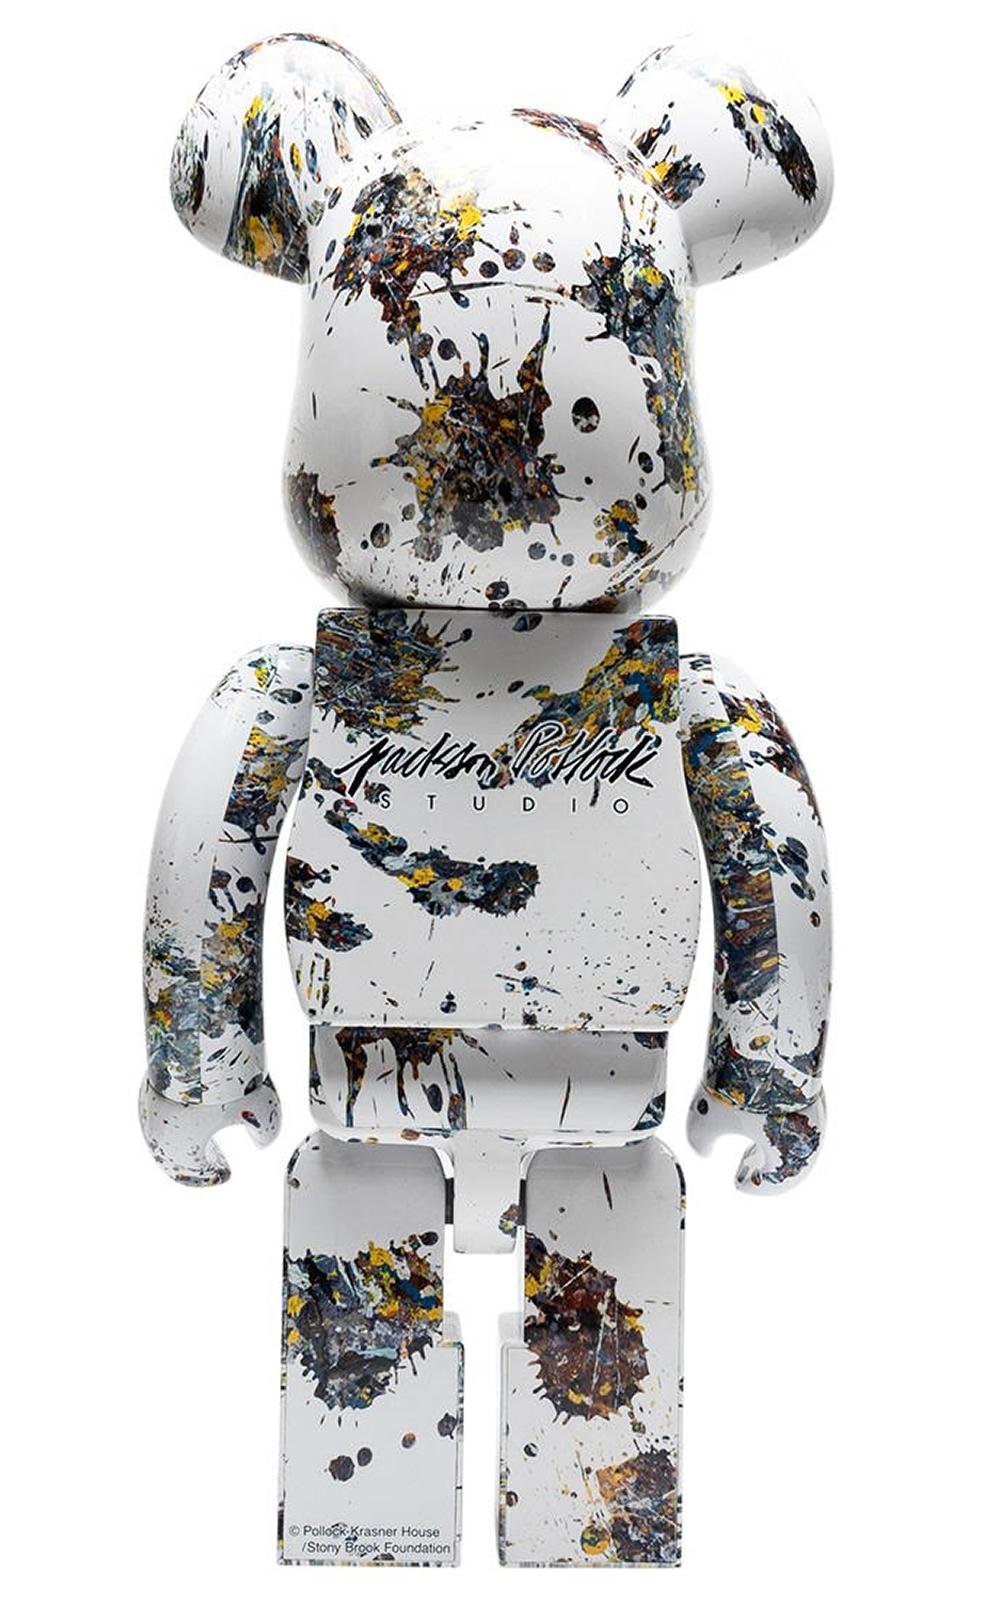 Jackson Pollock 1000% Bearbrick Figurative Sculpture: 
A nicely sized (27 inch heigh), highly collectible Bearbrick Jackson Pollock statue piece, splattered from head to toe in Pollock’s signature art; includes a recreation of the artist’s signature